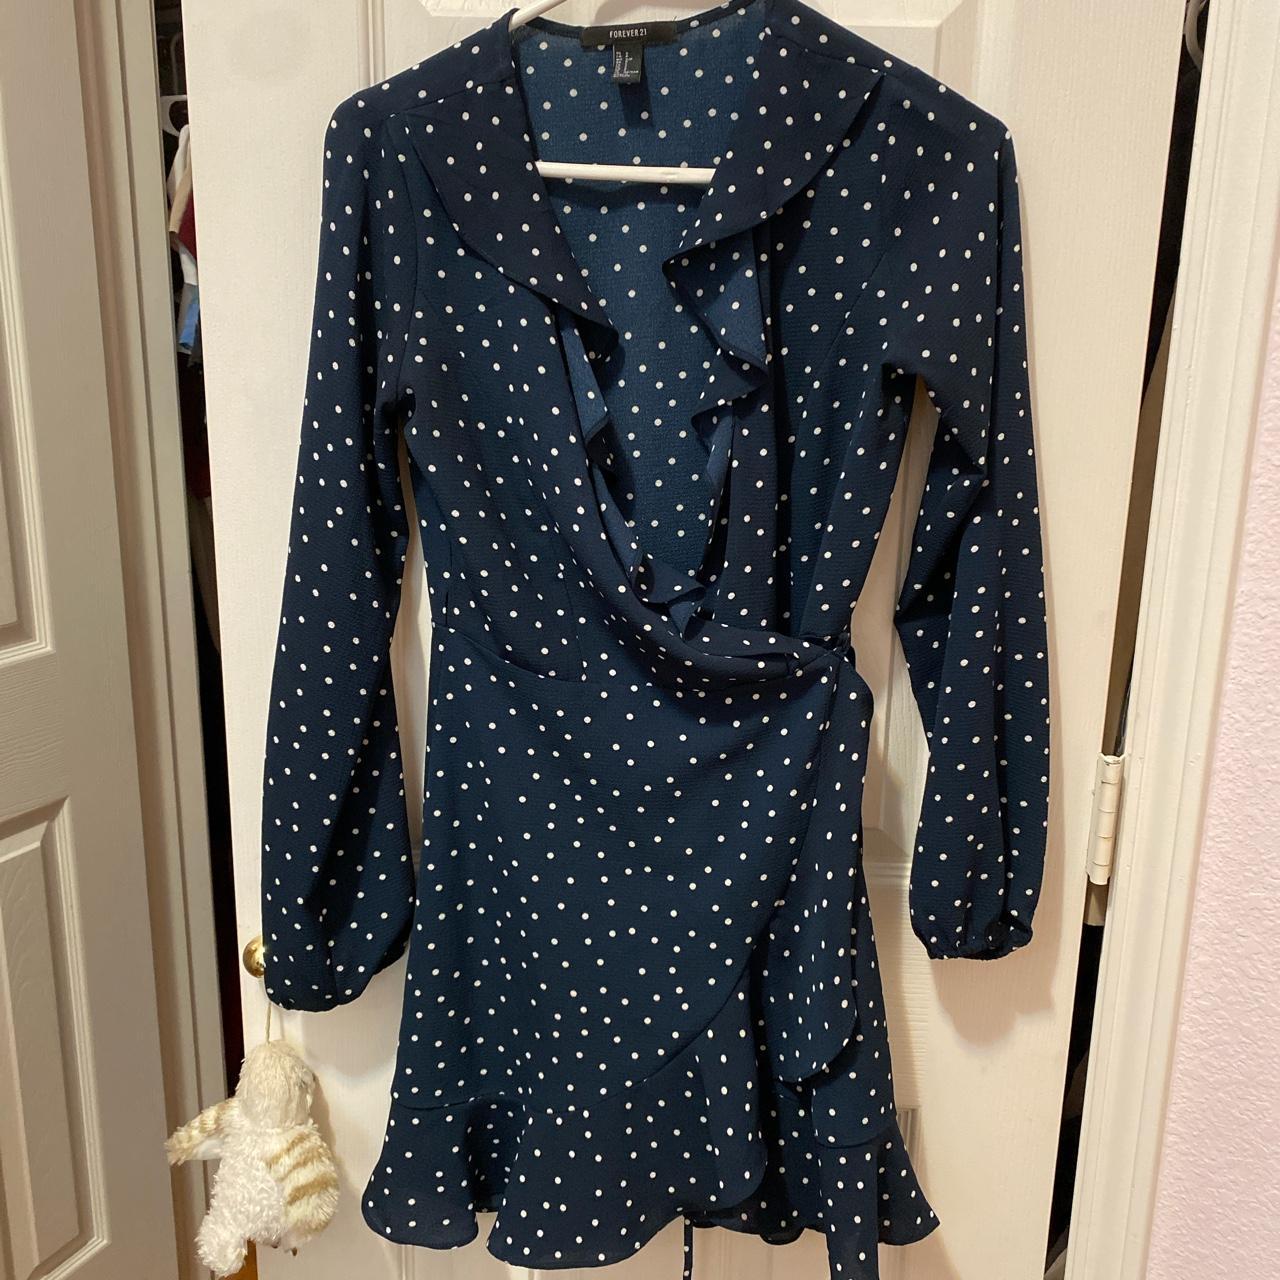 Polka dot wrap dress Too small for me now Size:S - Depop